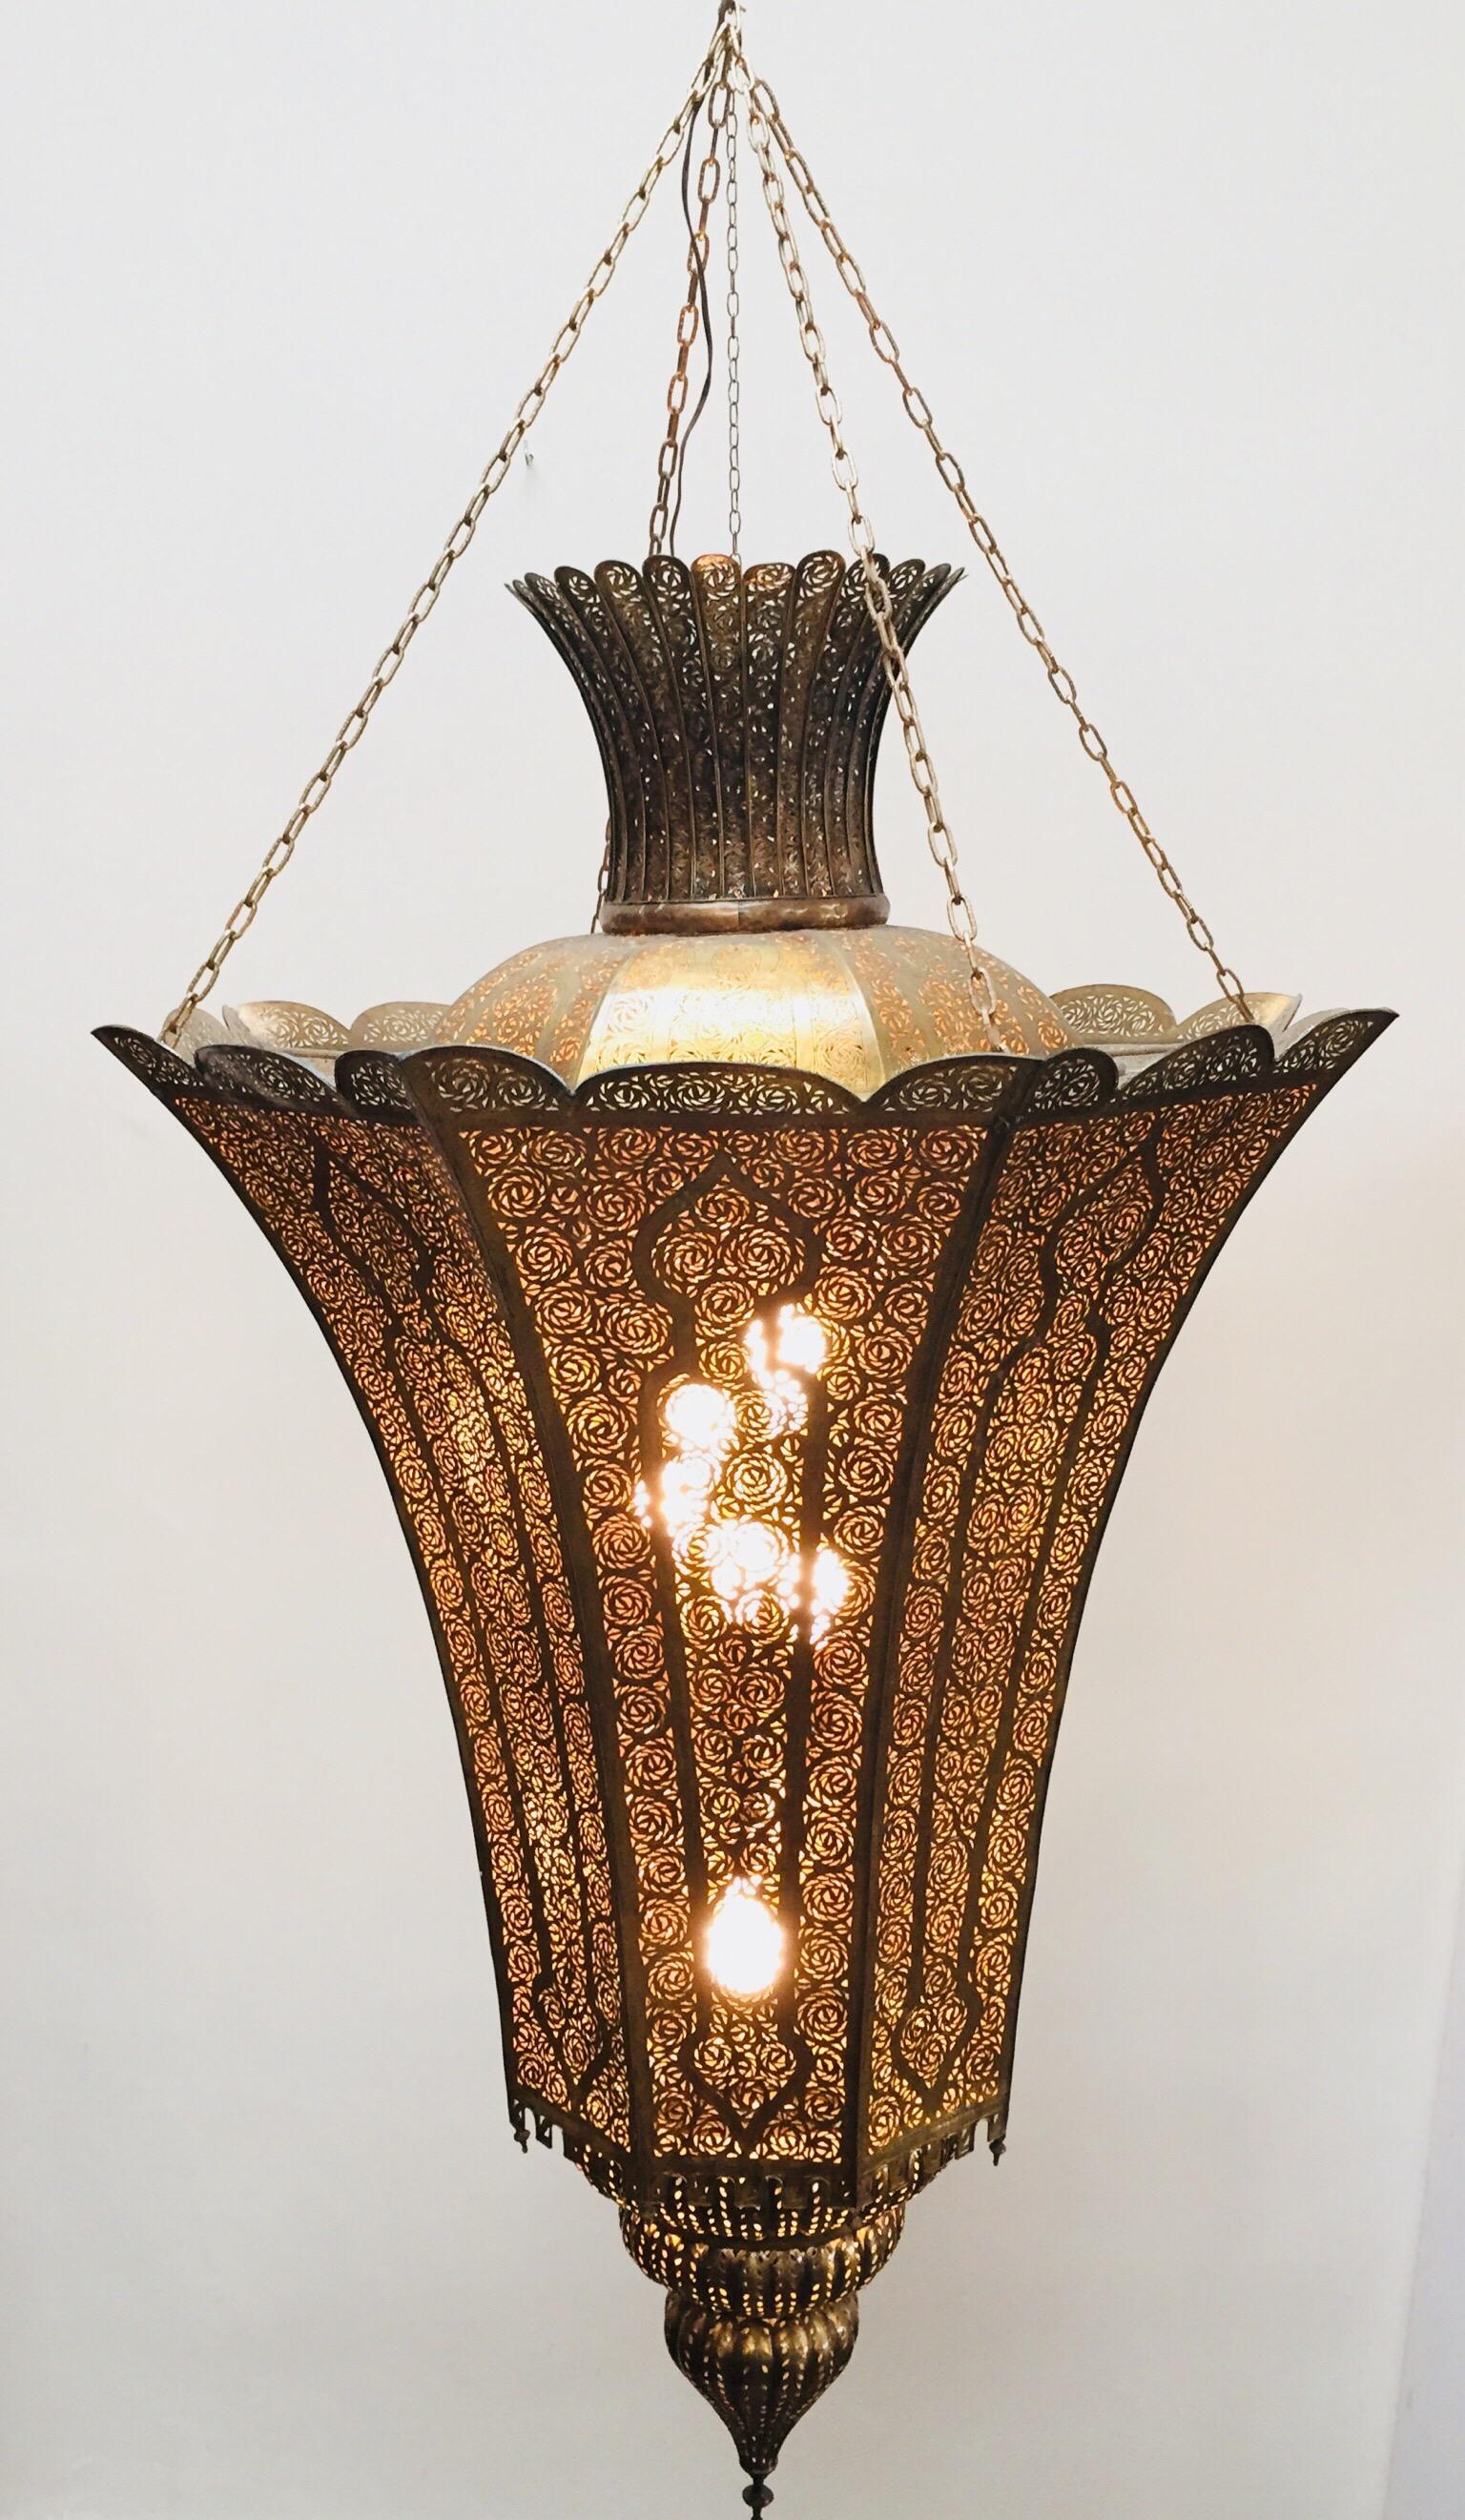 Oversized 7' high, spectacular, exquisite pierced brass Moorish Alhambra chandelier.
This exquisite light fixture is hand-crafted and chiselled with fine filigree Islamic designs.
Alberto Pinto Moorish style light fixture.
Moroccan lamp in brass